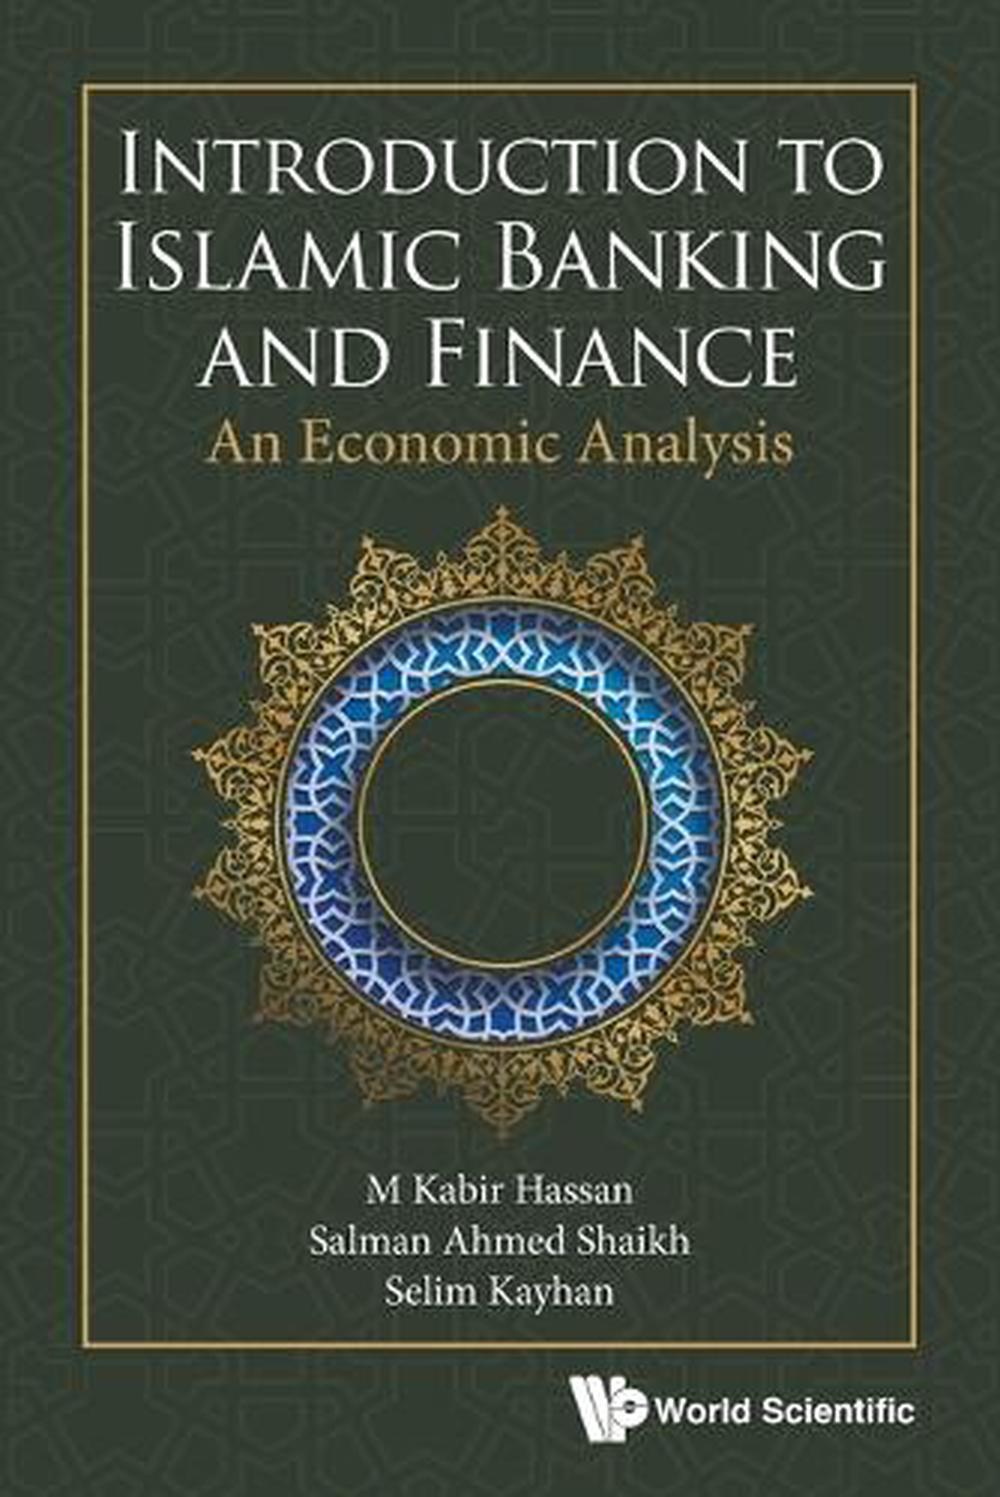 islamic banking and finance research topics